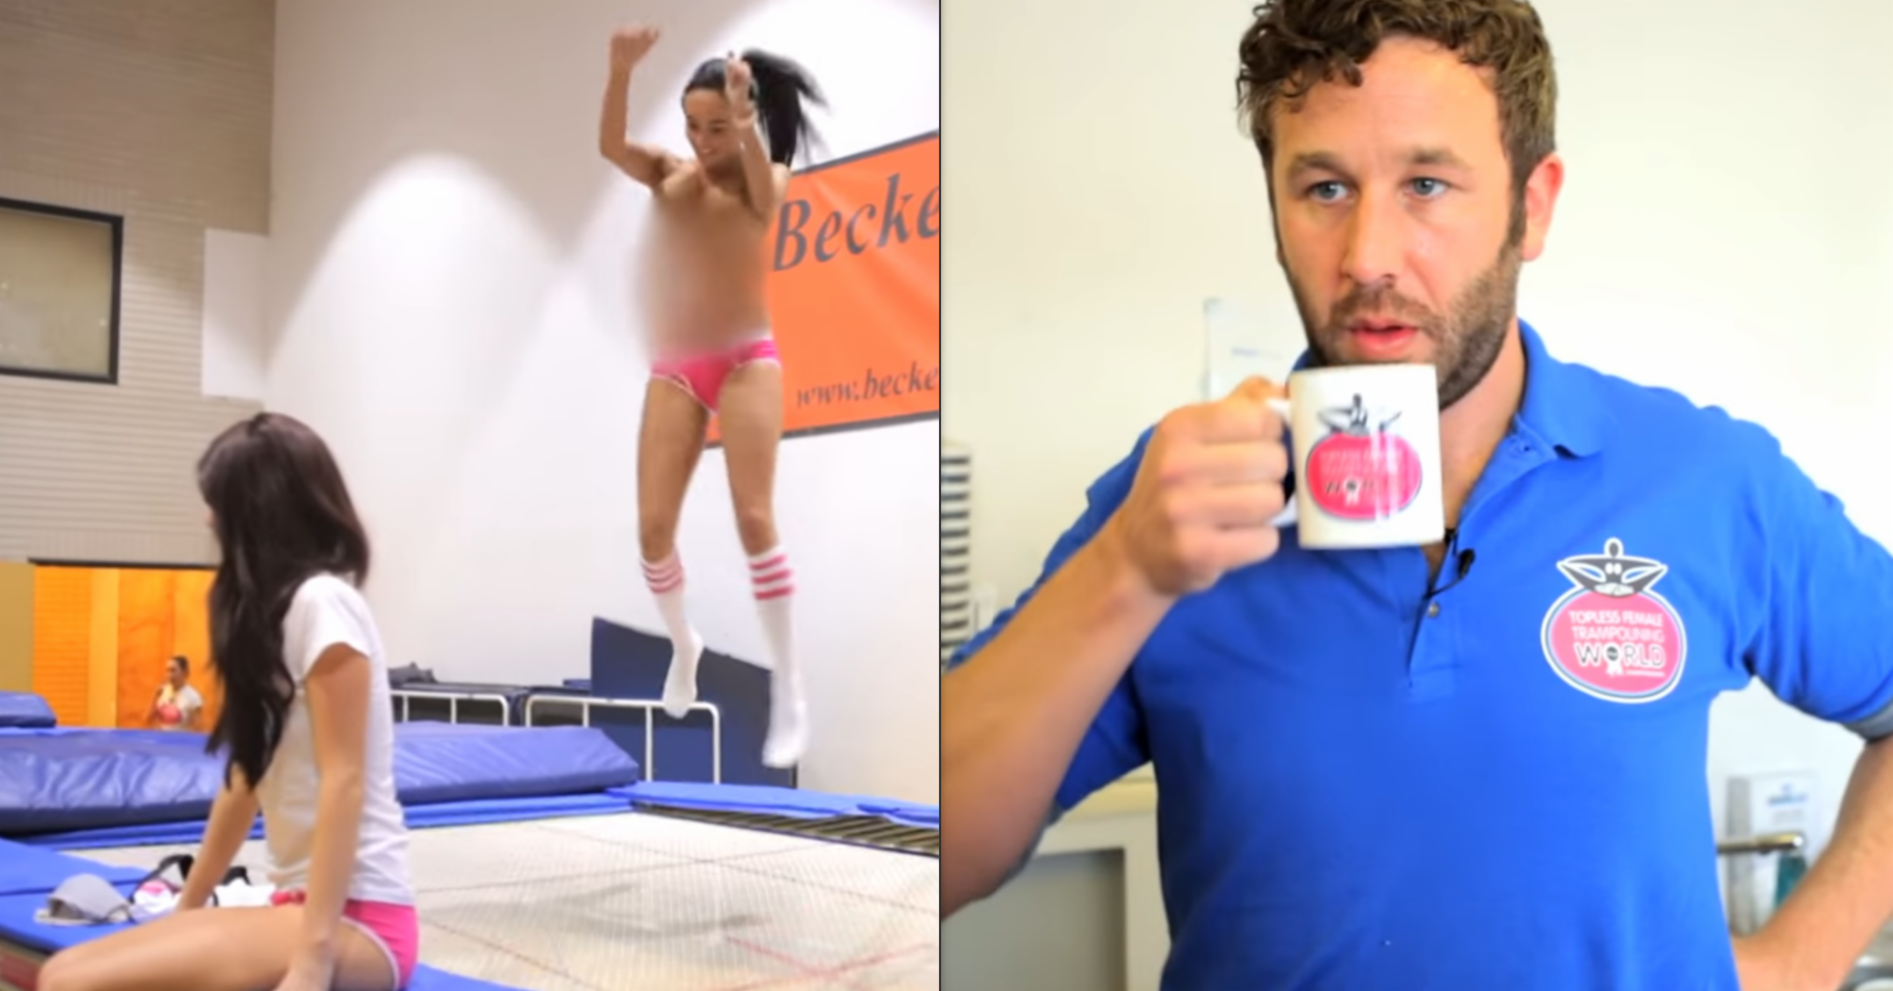 cj marley recommends topless women trampoline coach pic